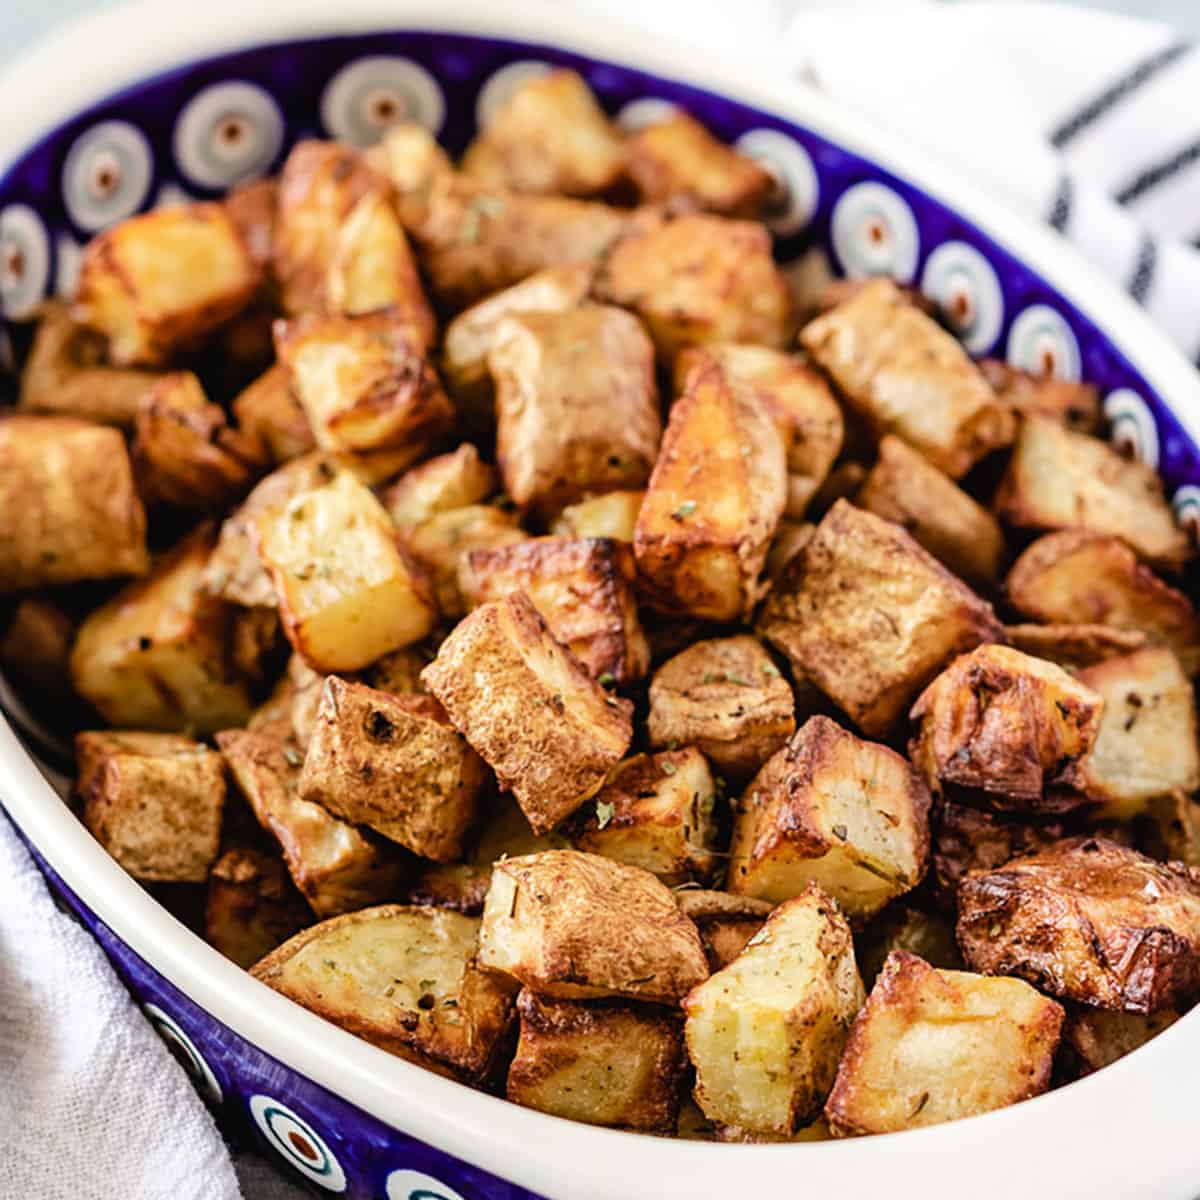 Air fryer home fries in a blue and white dish.